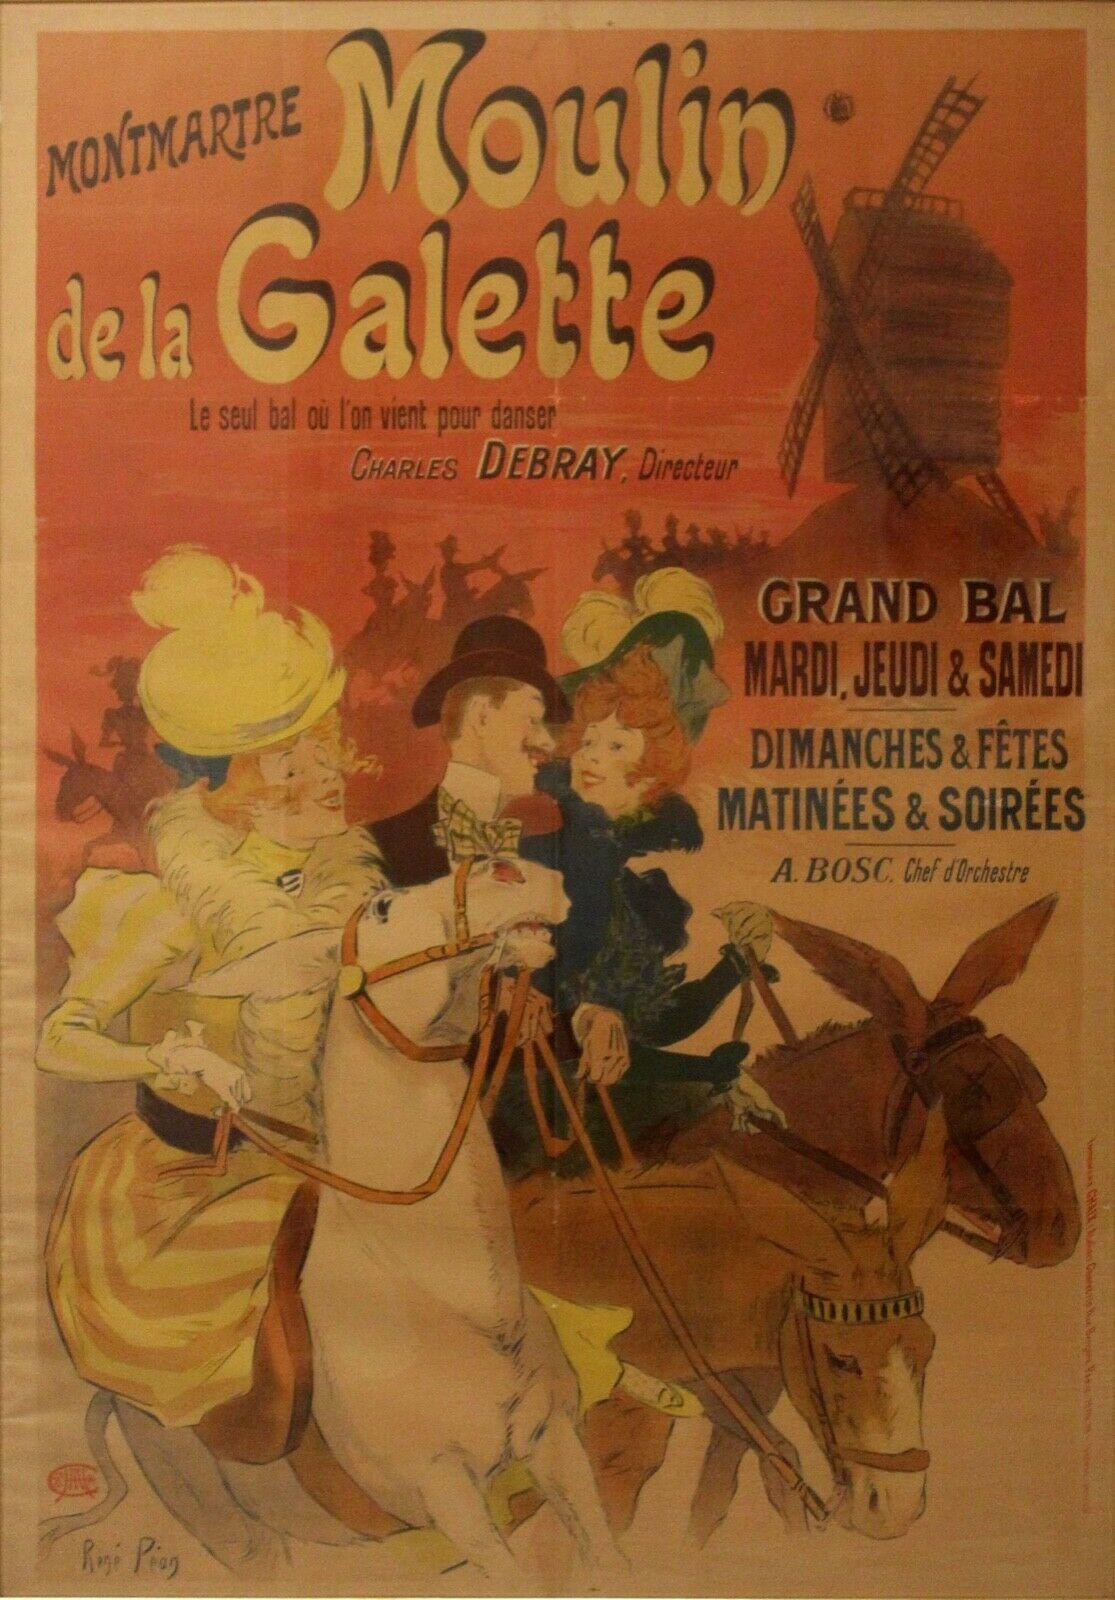 A lovely large-scale vintage poster, depicting Montmarte Moulin de la Galette, by French artist Rene Pean. This is in the iconic style of the artist showcasing elegantly dressed woman in classic Parisian landscapes. Dimensions: 47.5w x 1.5d x 65h